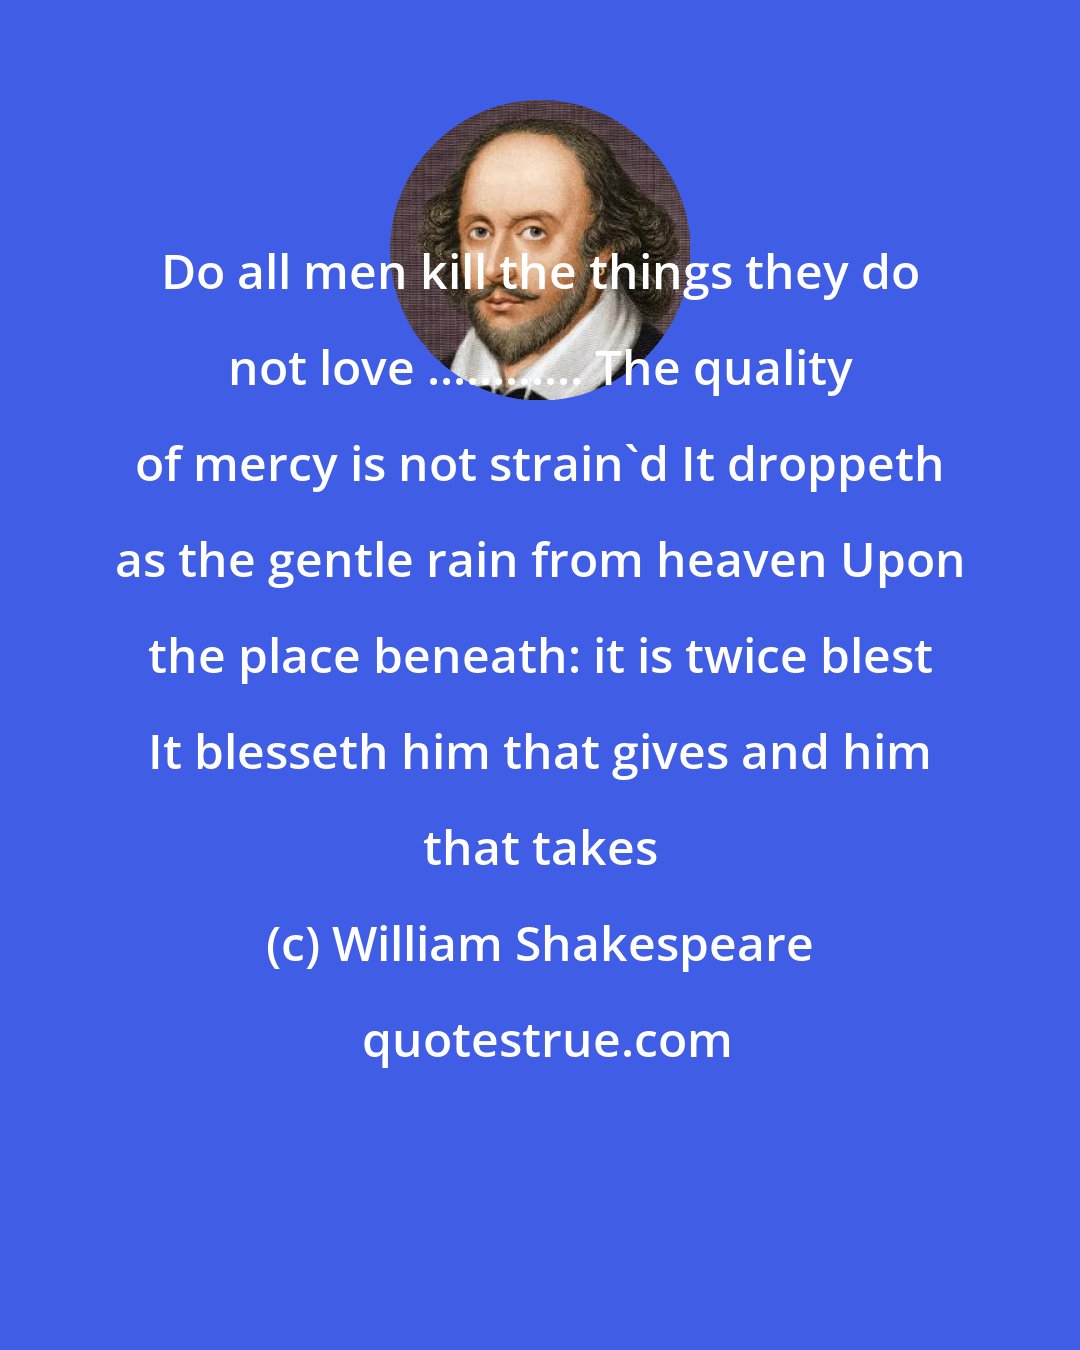 William Shakespeare: Do all men kill the things they do not love ............ The quality of mercy is not strain'd It droppeth as the gentle rain from heaven Upon the place beneath: it is twice blest It blesseth him that gives and him that takes